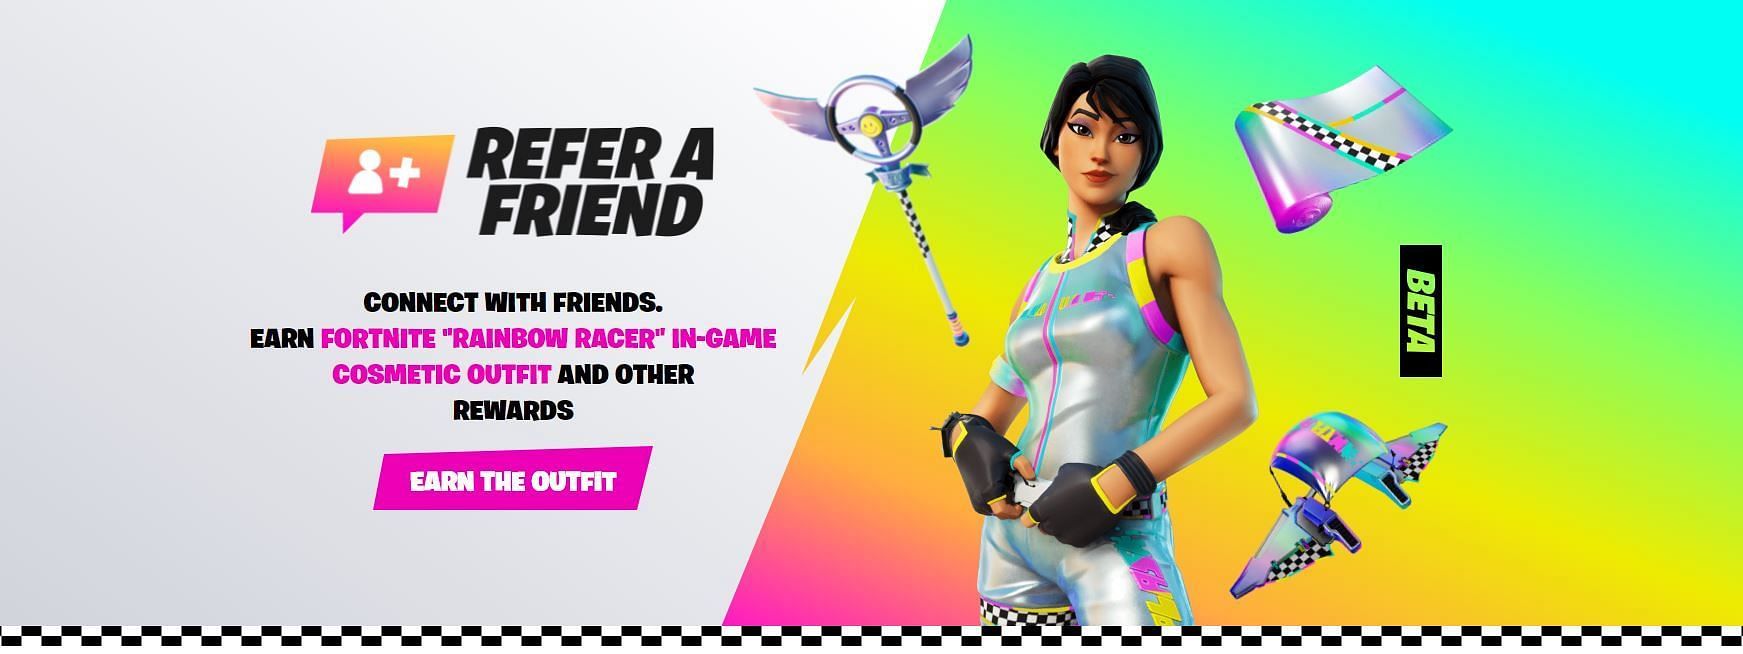 The Refer A Friend program is easy to join. (Image via Epic Games)